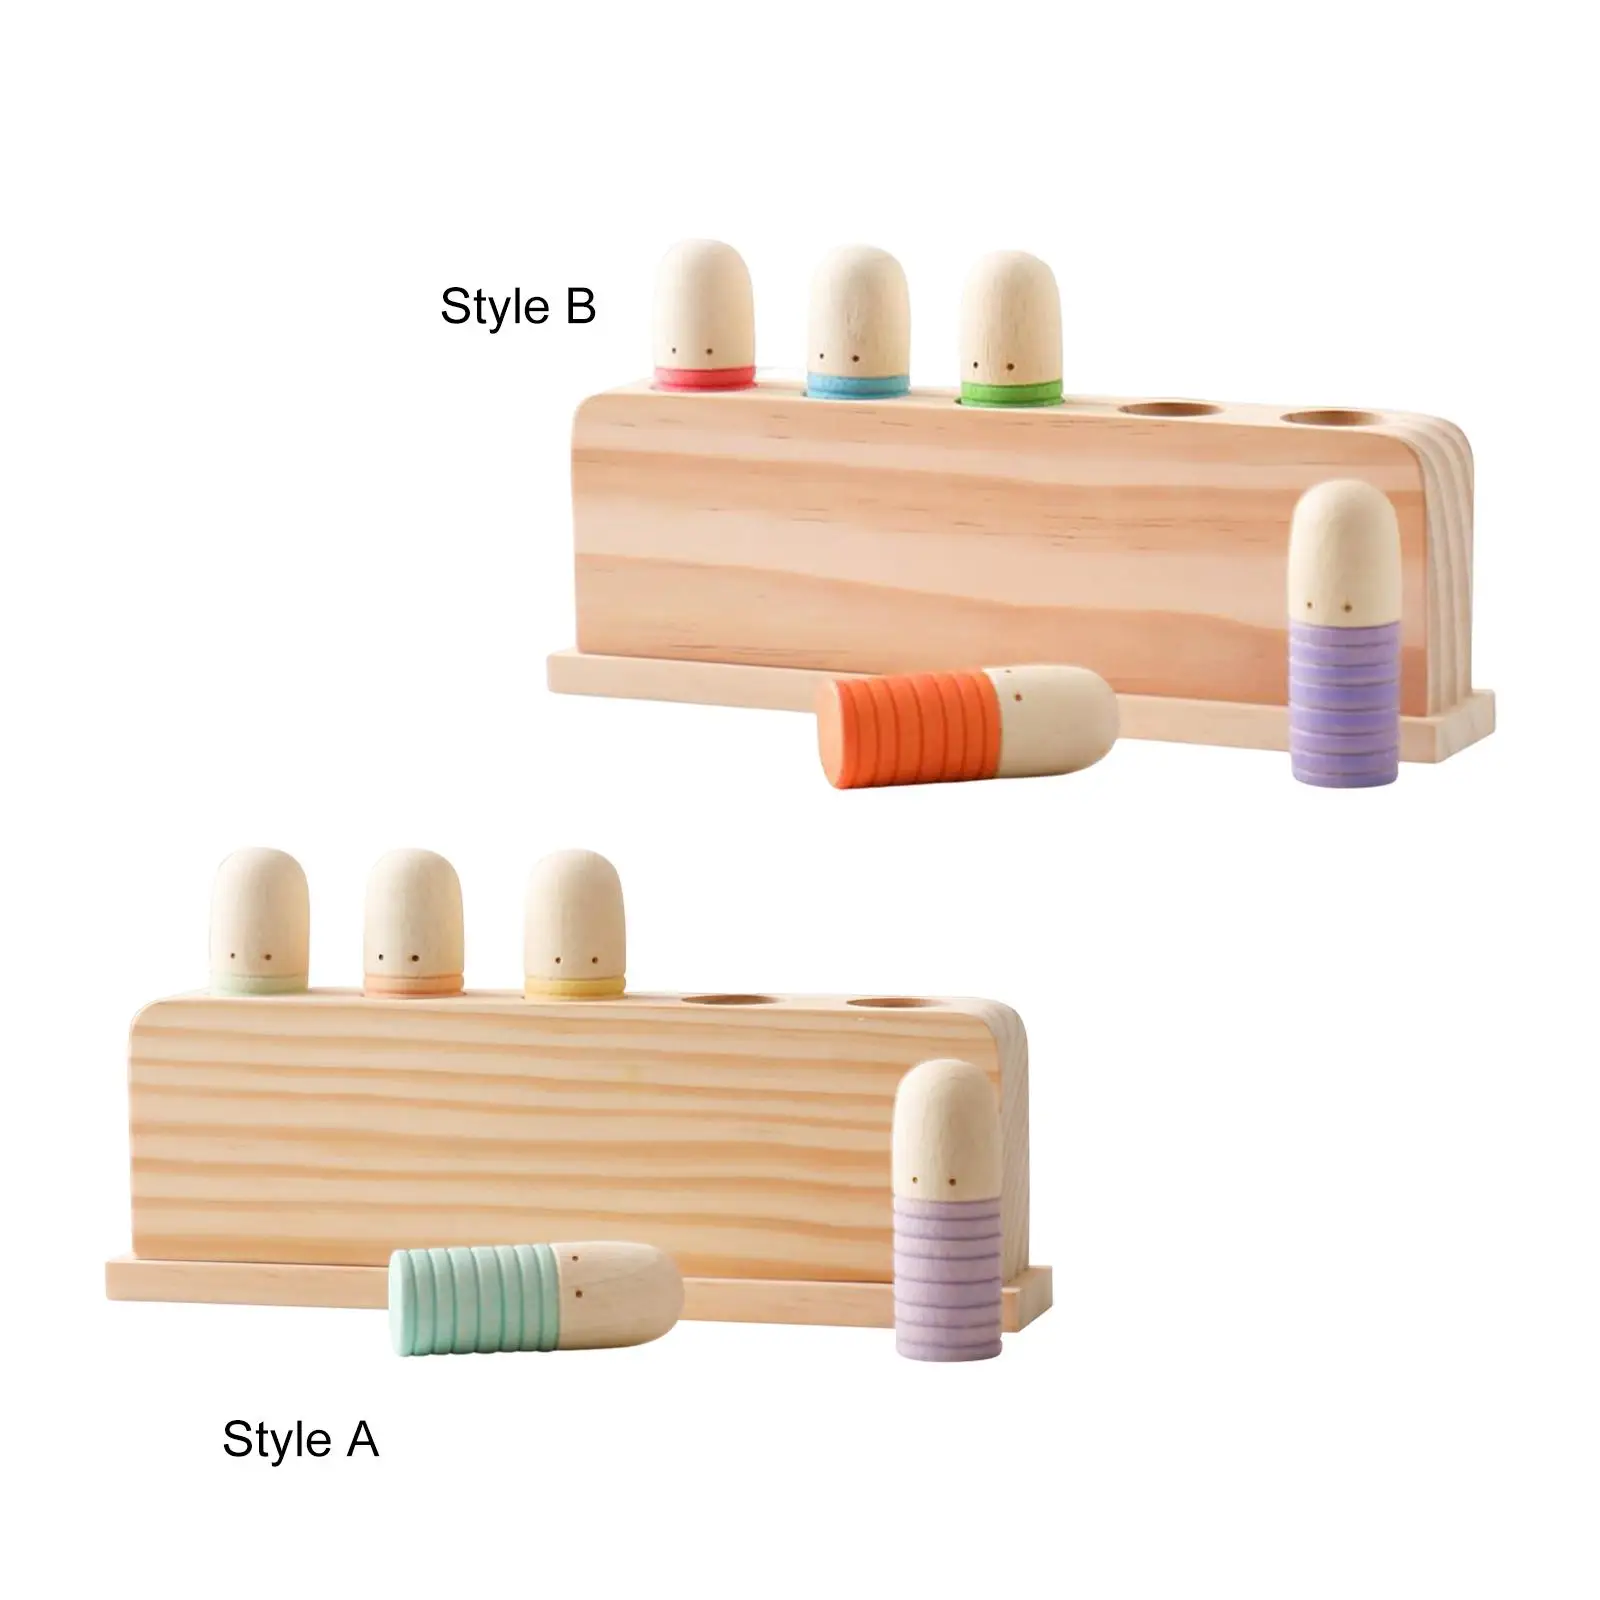 5 Wood People Figures Cylinder Blocks Bounce Game Preschool Learning Wooden Rainbow Peg Dolls Shapes Sorting Toys for Girls Boys